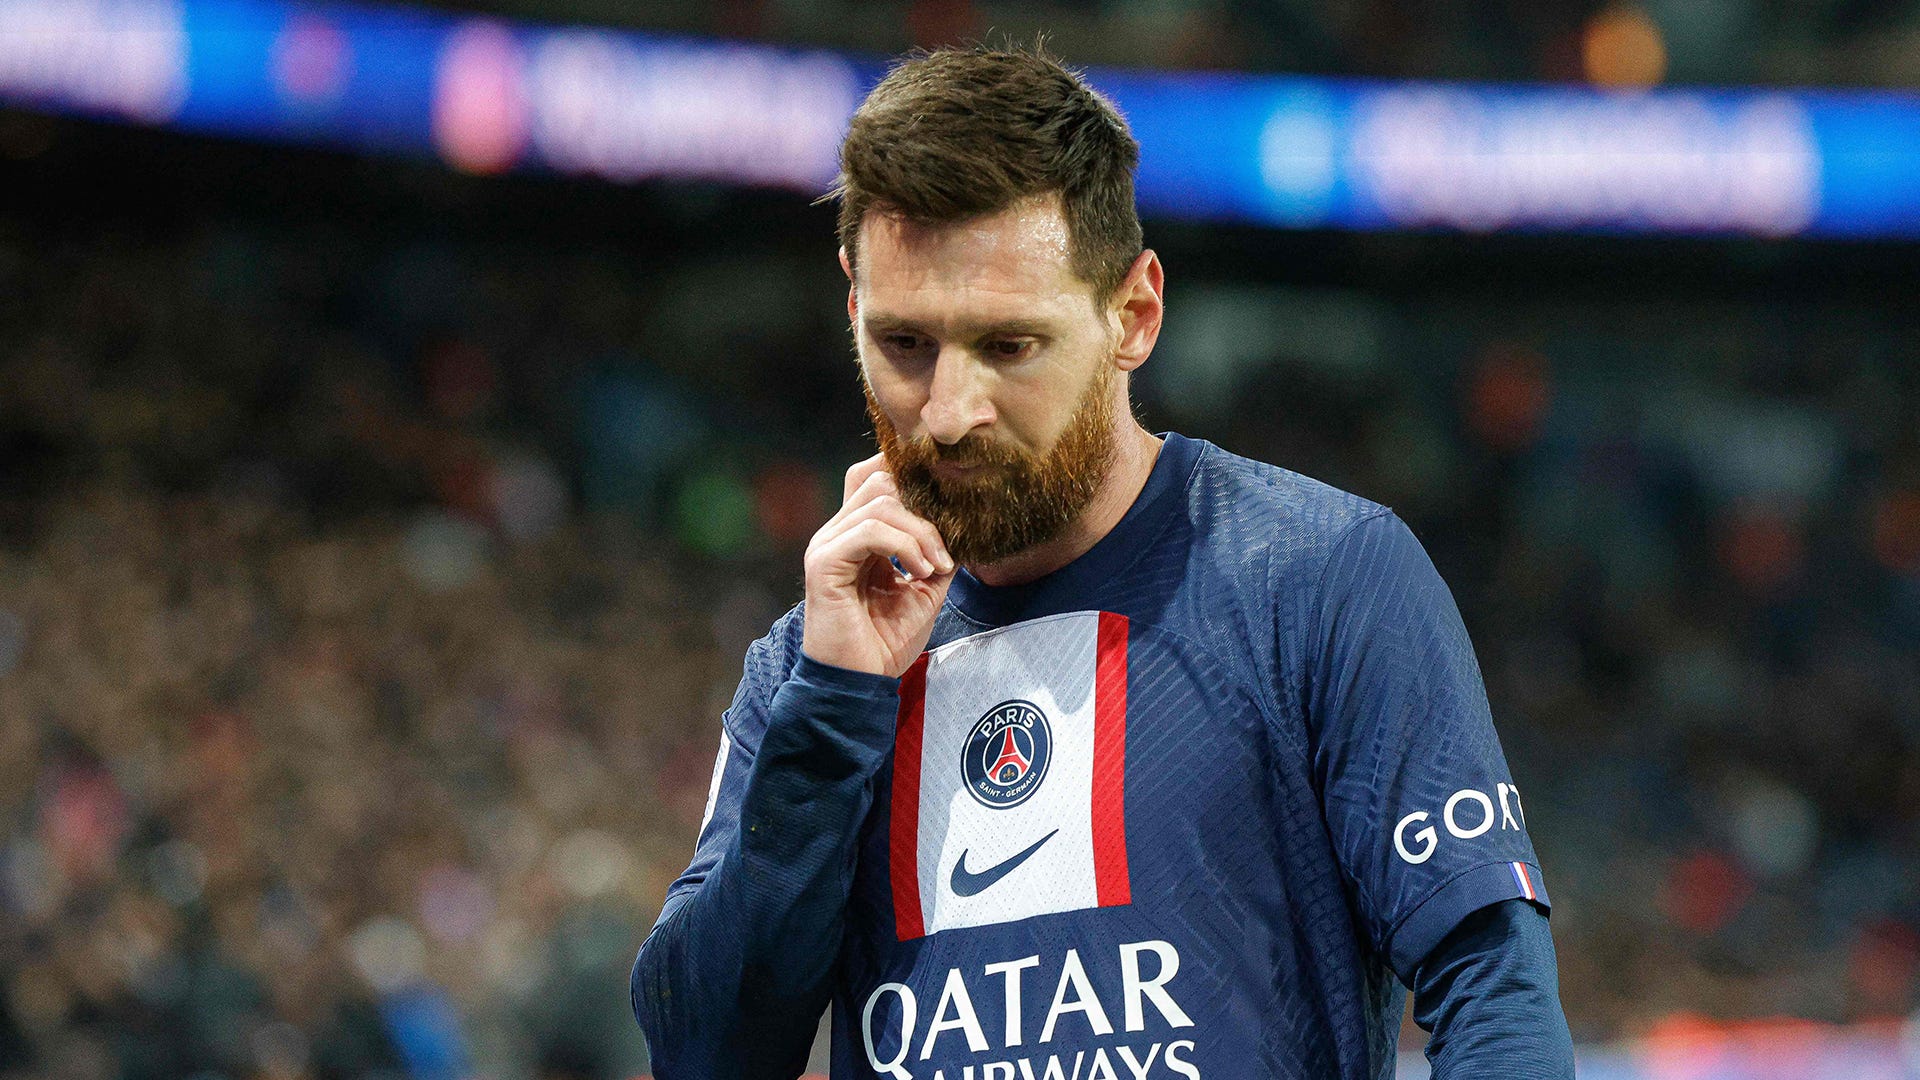 'Messi's extension is bullsh*t!' - PSG warned new contract for Argentina superstar is a 'very bad idea'